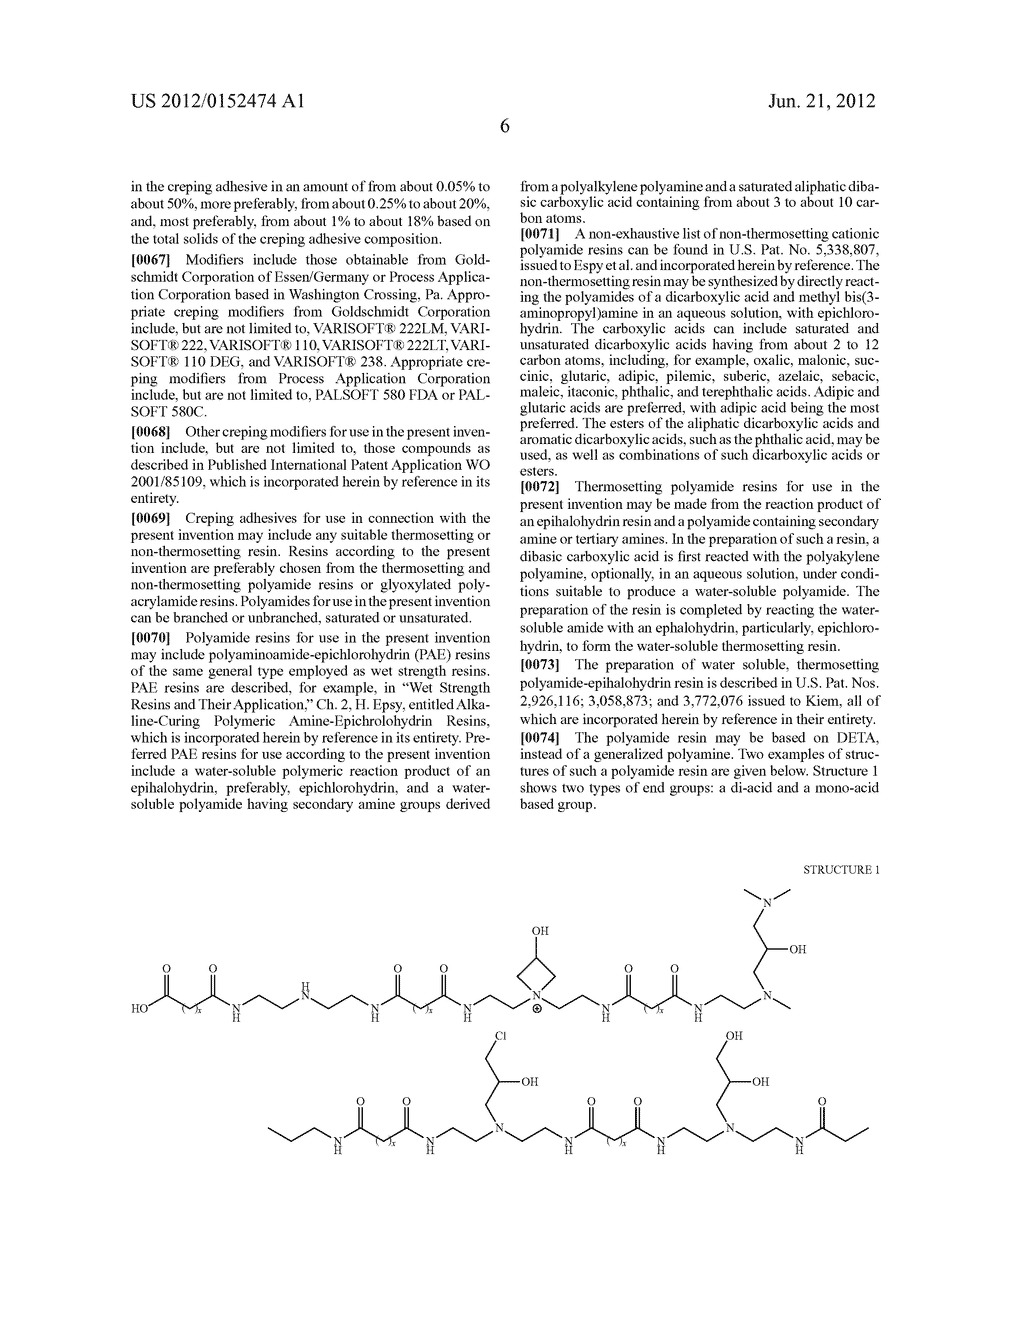 Fabric-Creped Absorbent Cellulosic Sheet Having A Patterned Distribution     Of Fibers - diagram, schematic, and image 24